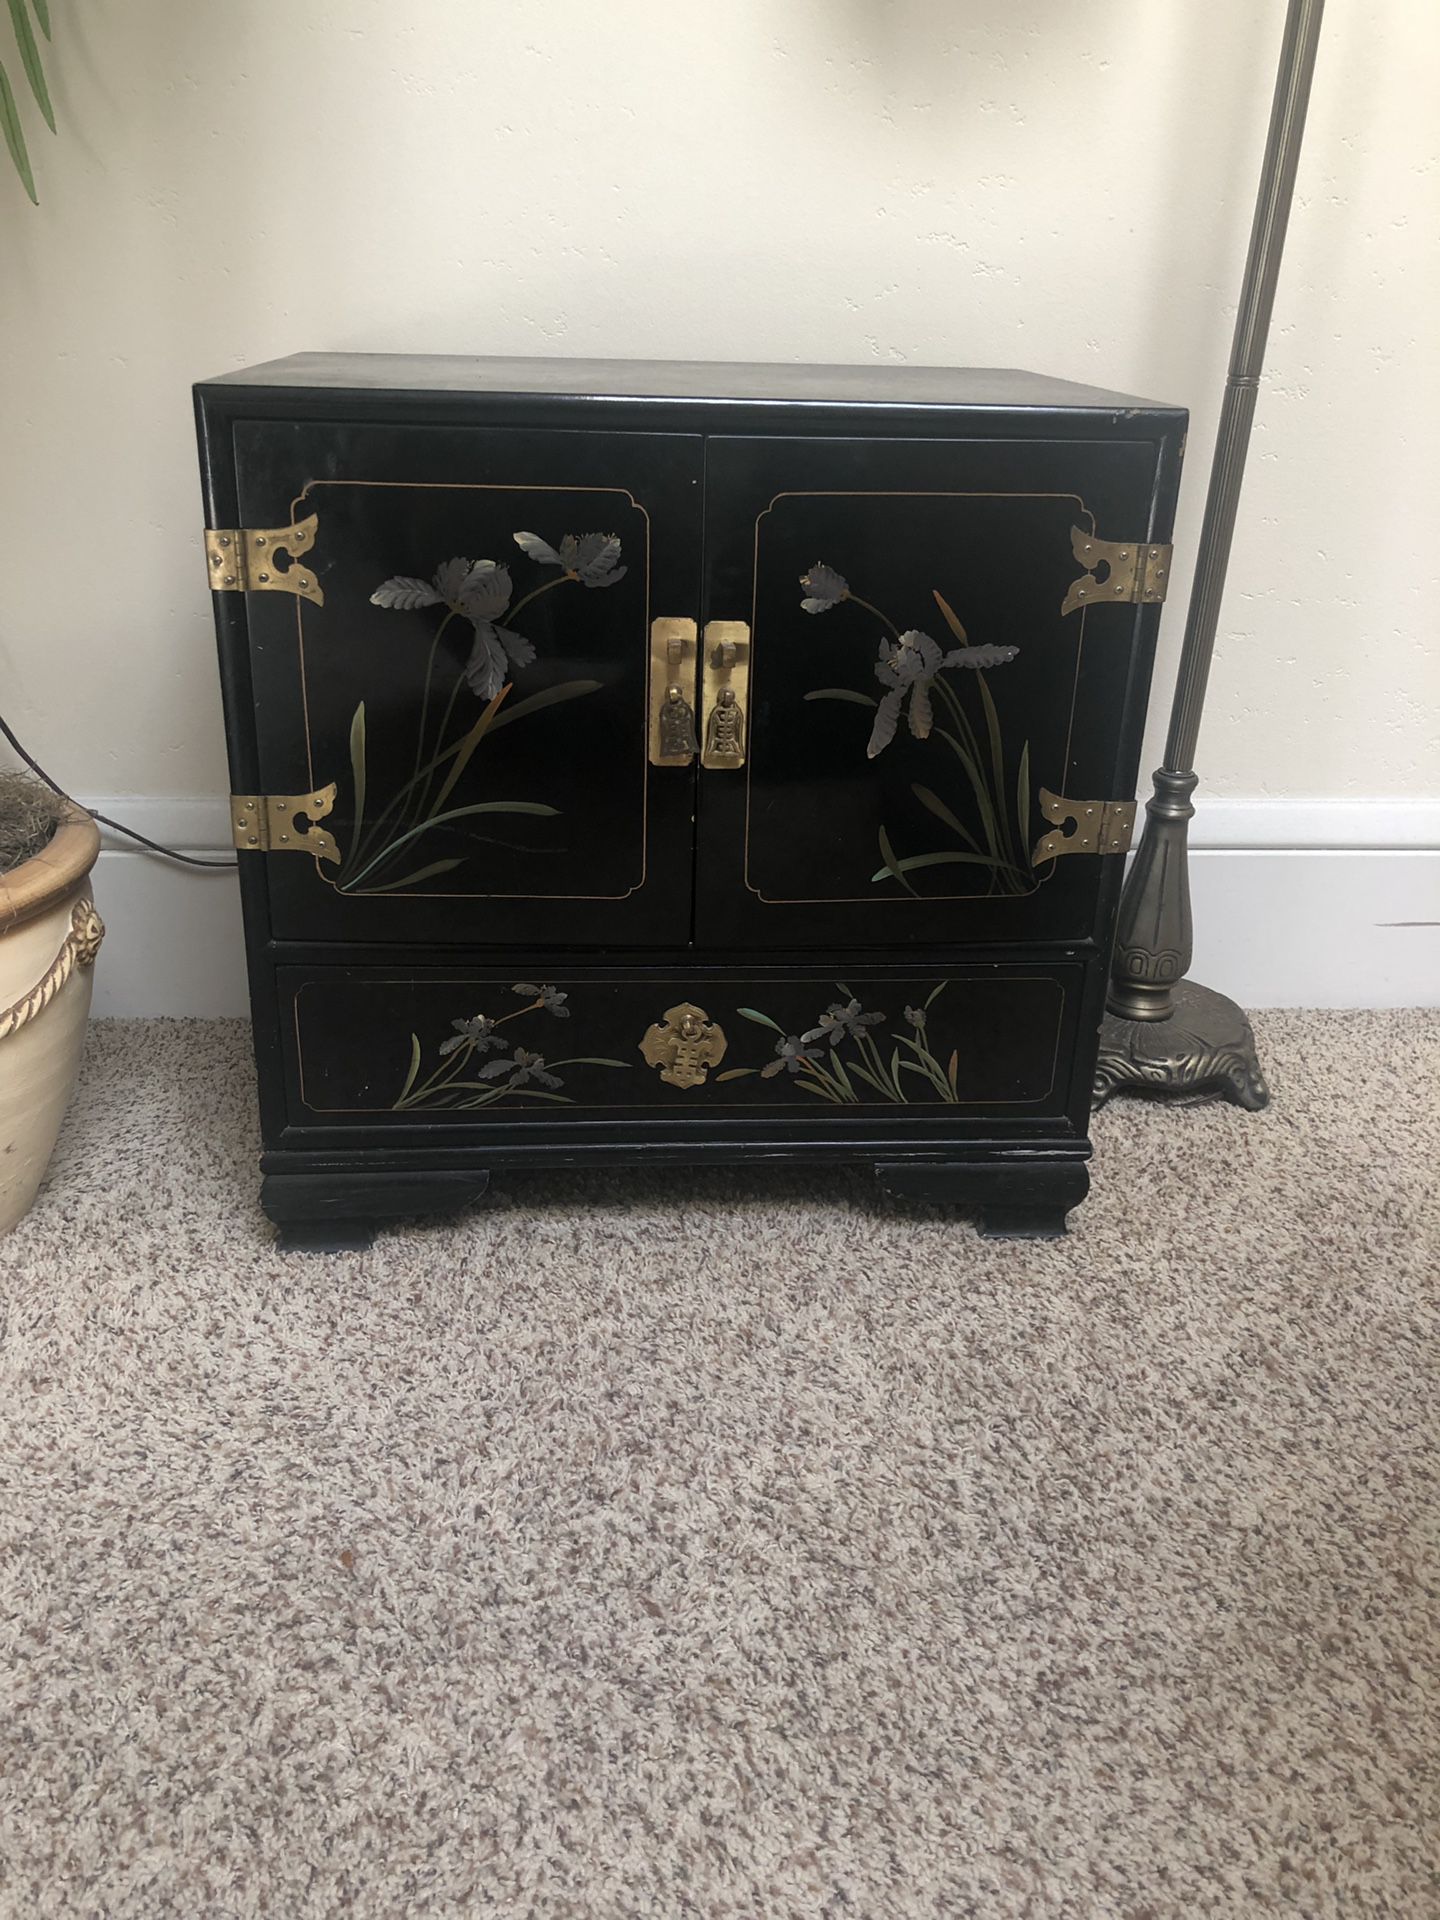 Lovely Asian small cabinet or end table